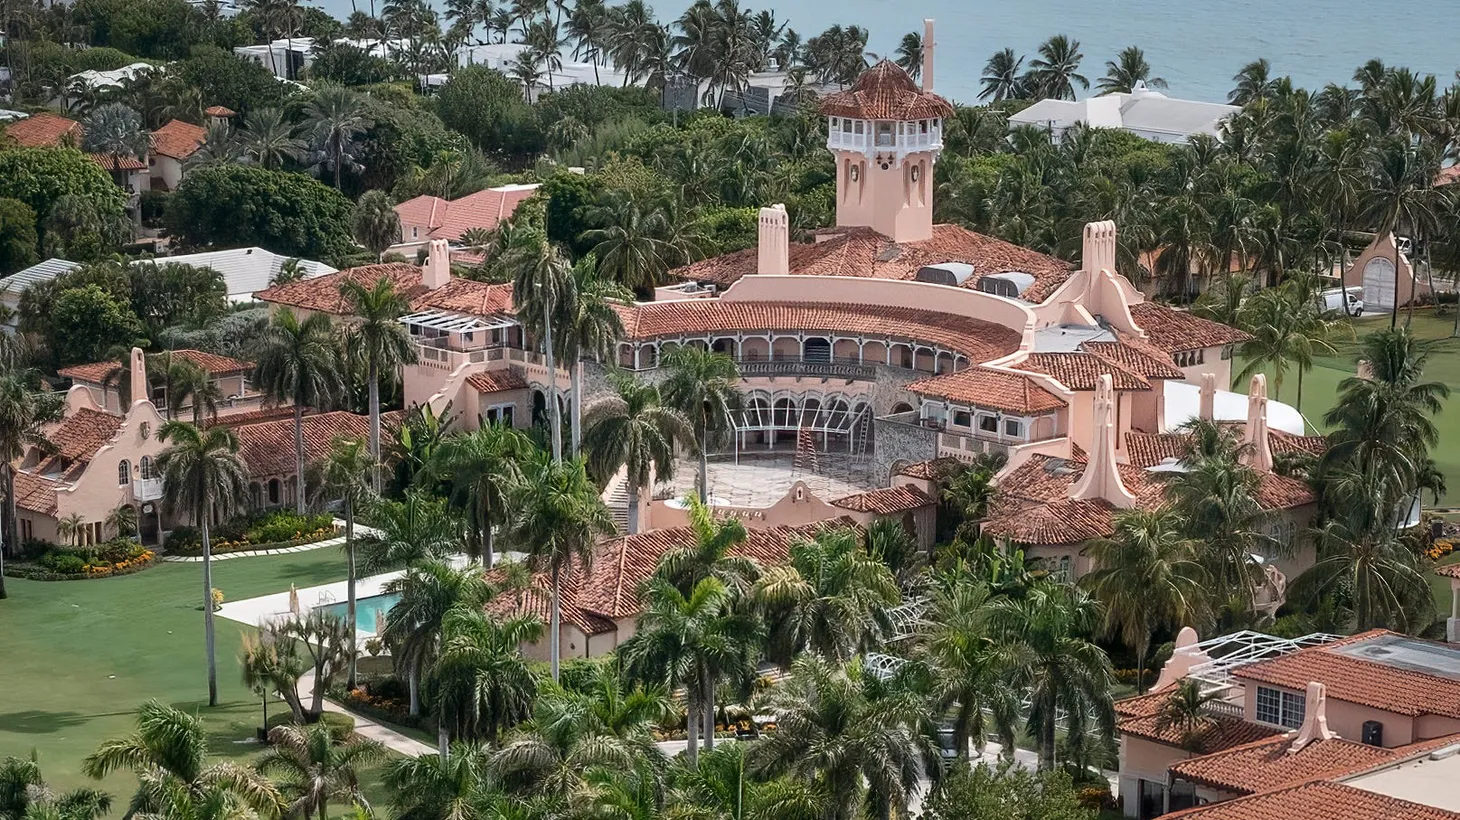 President Donald Trump's Mar-a-Lago estate is seen on August 26, 2022, in Palm Beach, Florida.